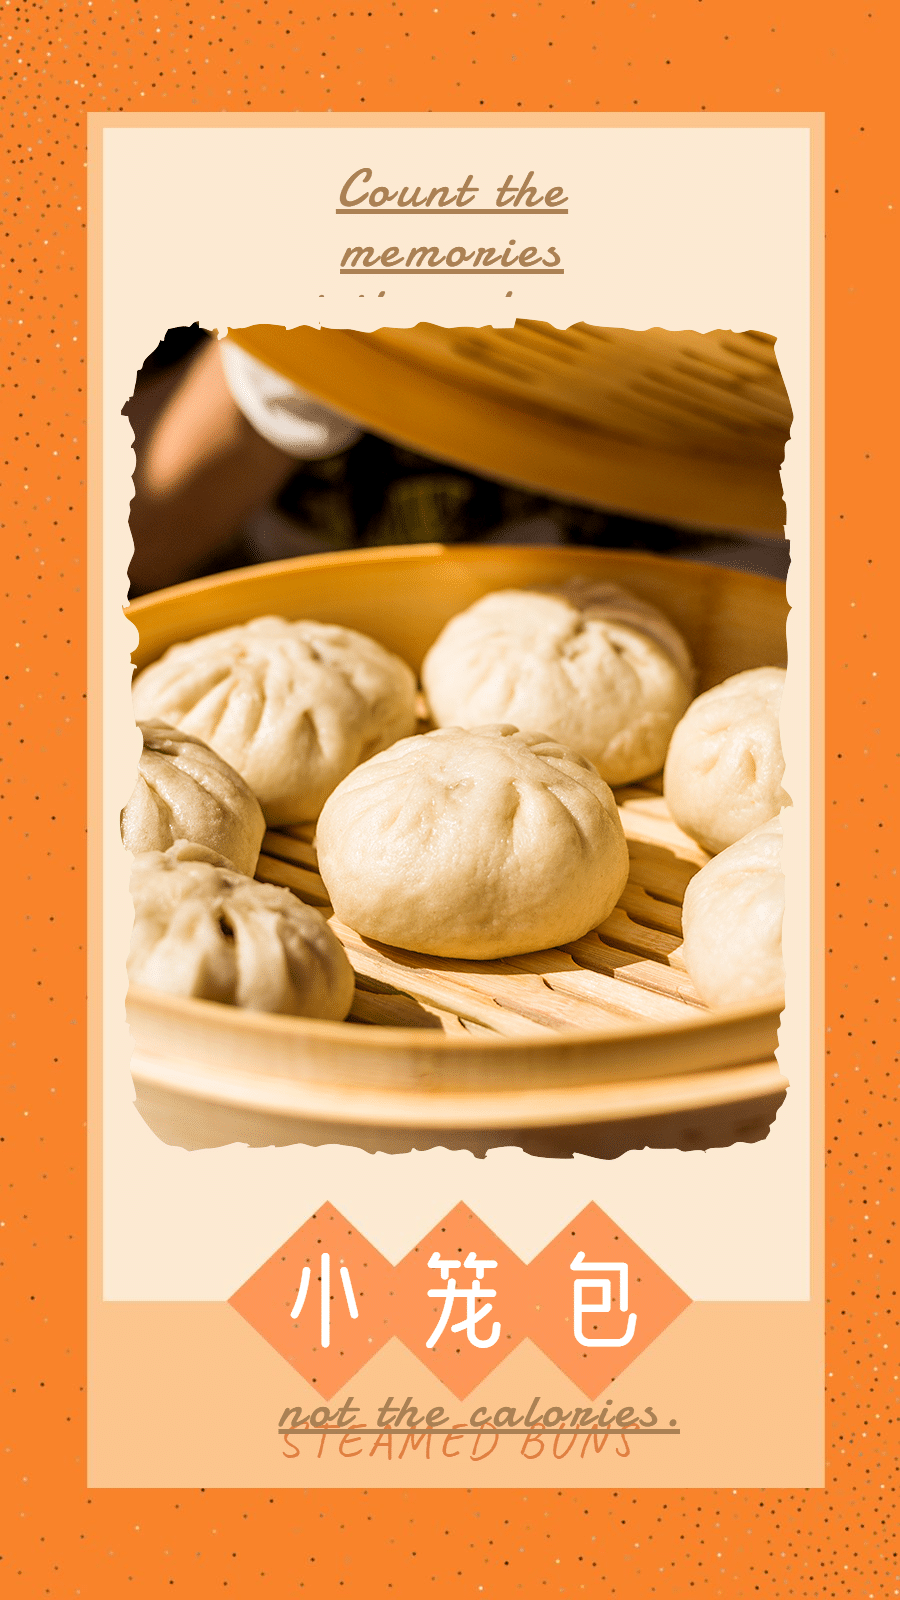 Chinese Delicious Food Record Steamed Dumplings Simple Festive Style Instagram Story预览效果